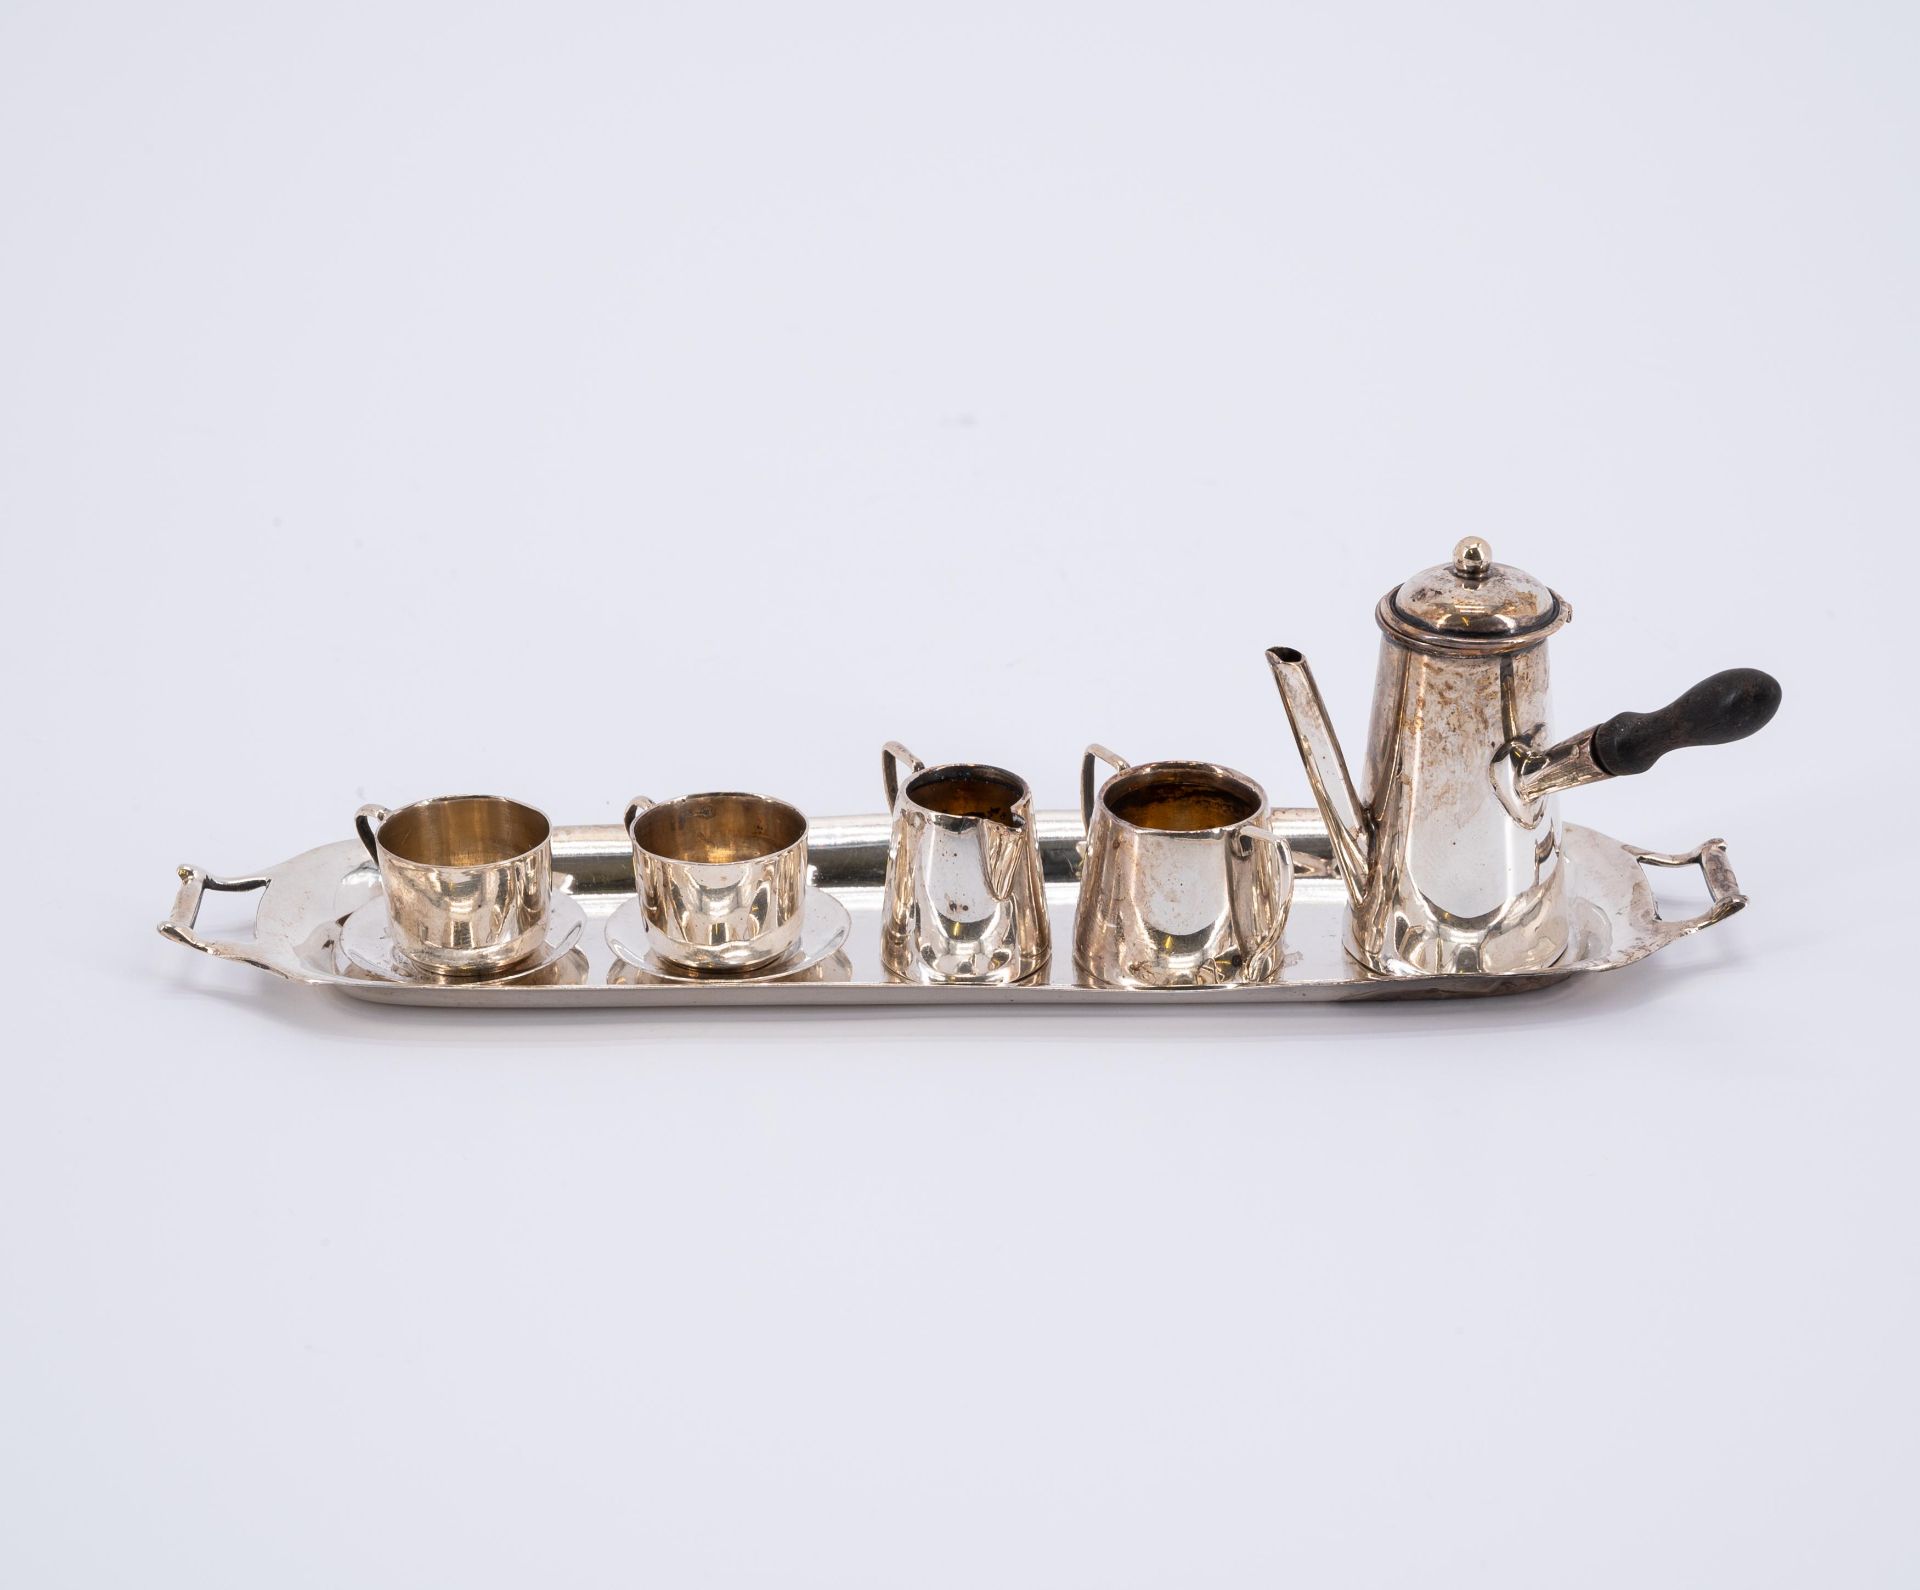 ENSEMBLE OF 15 SILVER MINIATURE OBJECTS - Image 2 of 9